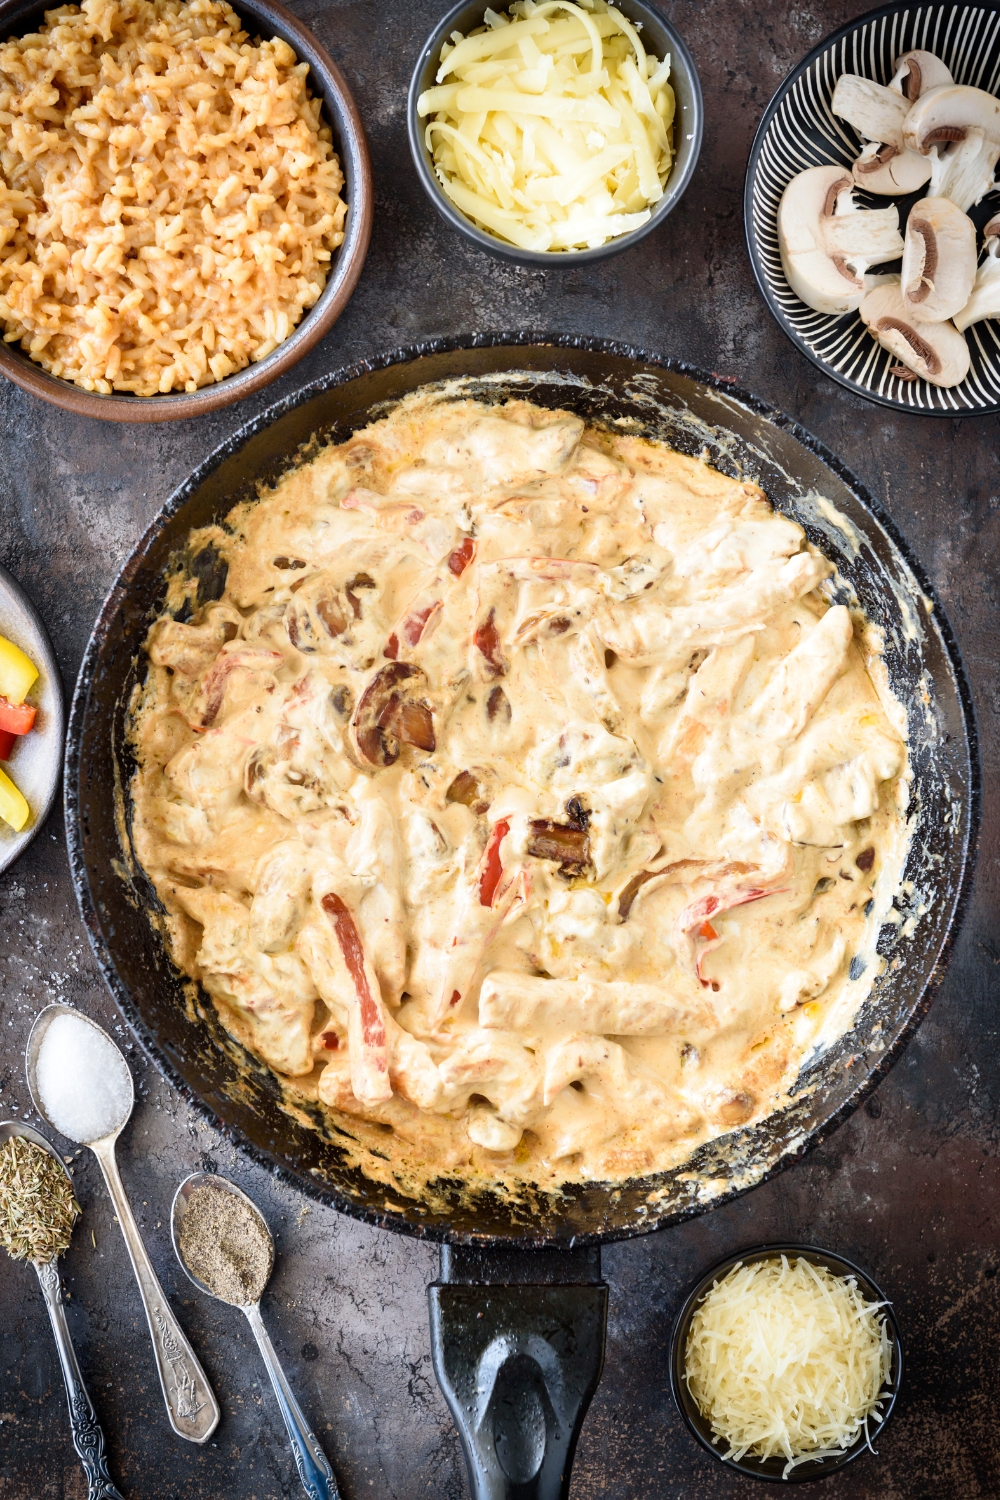 A skillet filled with chicken, peppers, and mushrooms in a seasoned cream sauce.